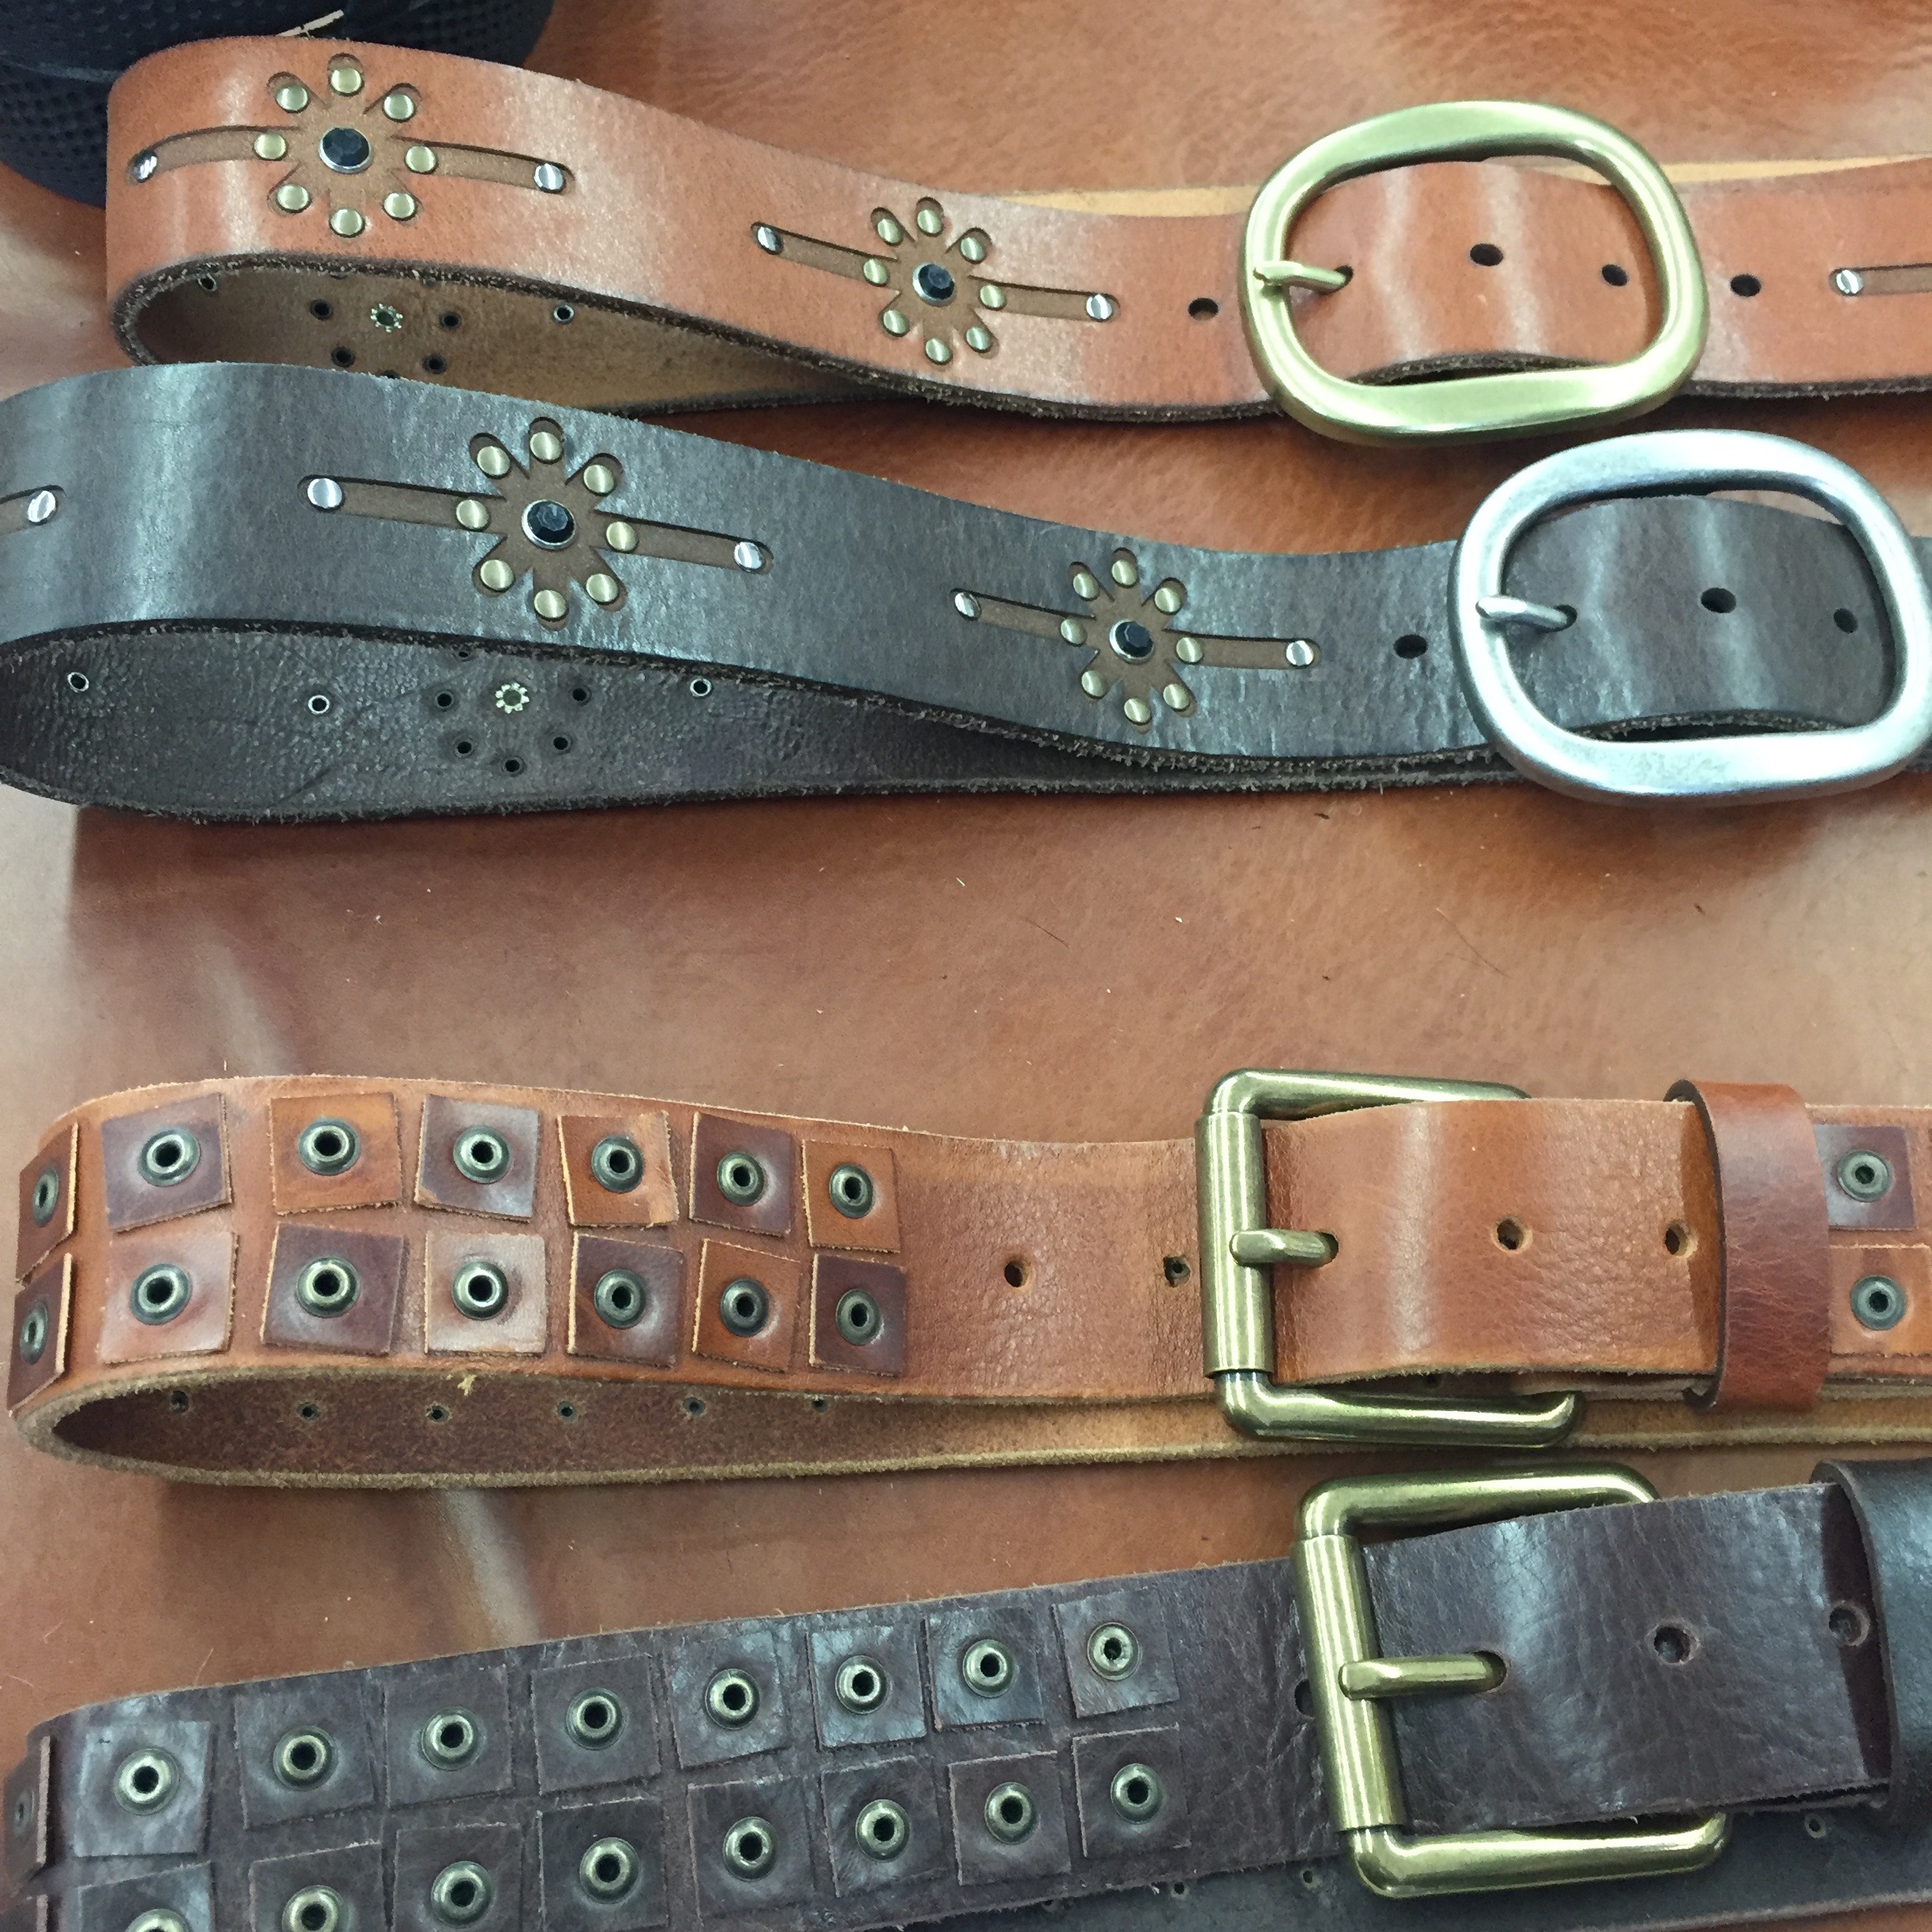  These ones really show off the skill of the Brave Leather makers. That flower detail is made by slicing away a layer of the leather and then adding rivets. A bit western, a lot boho. 